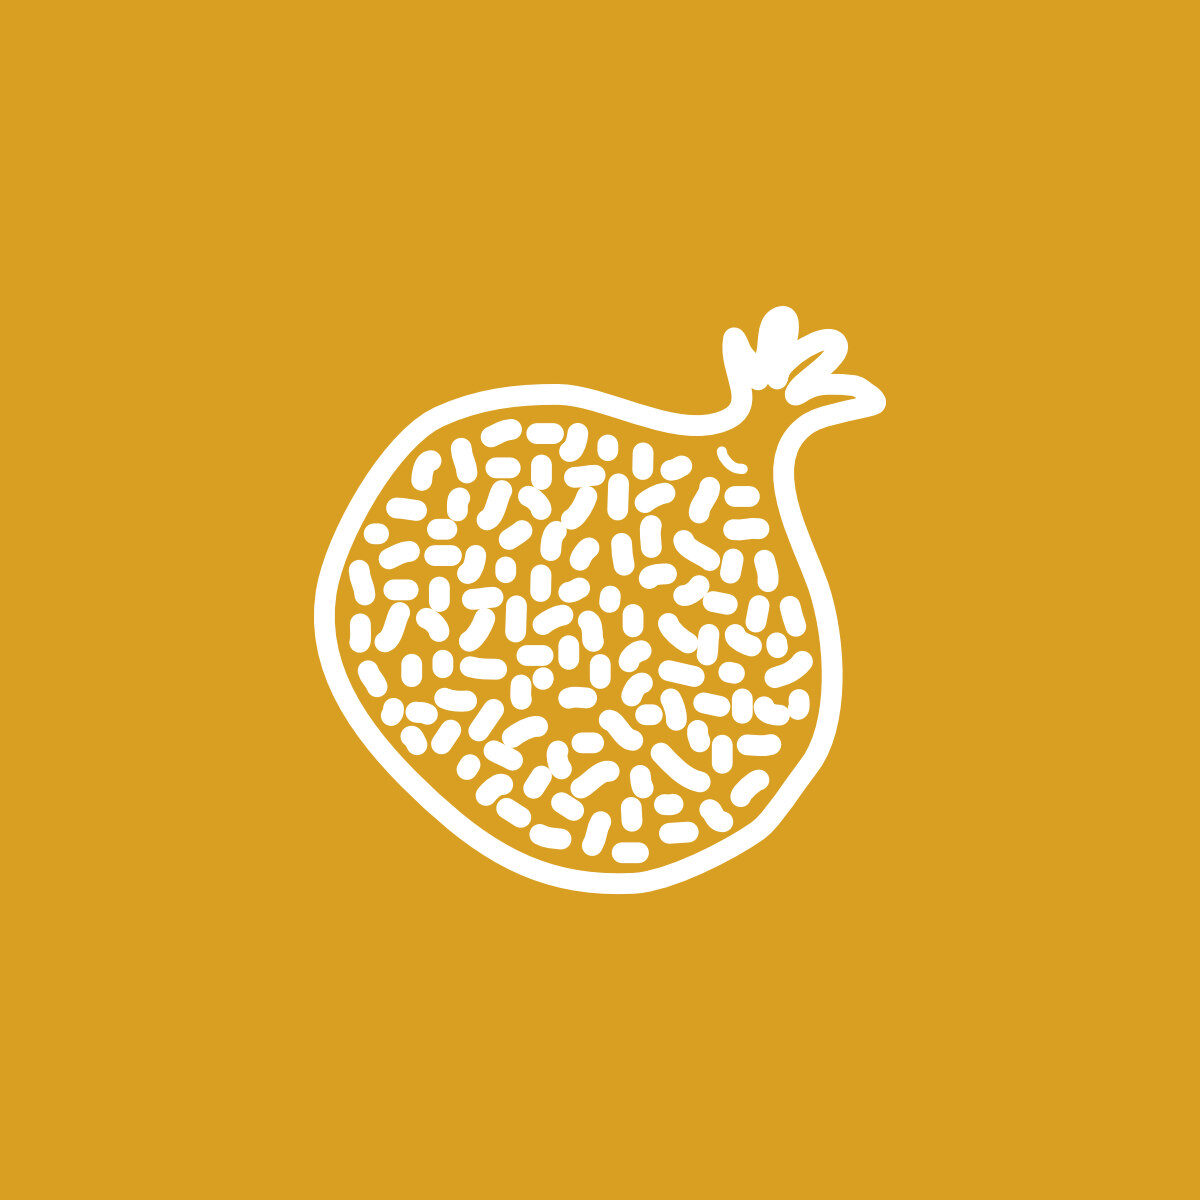 Pomegranate icon on yellow background.